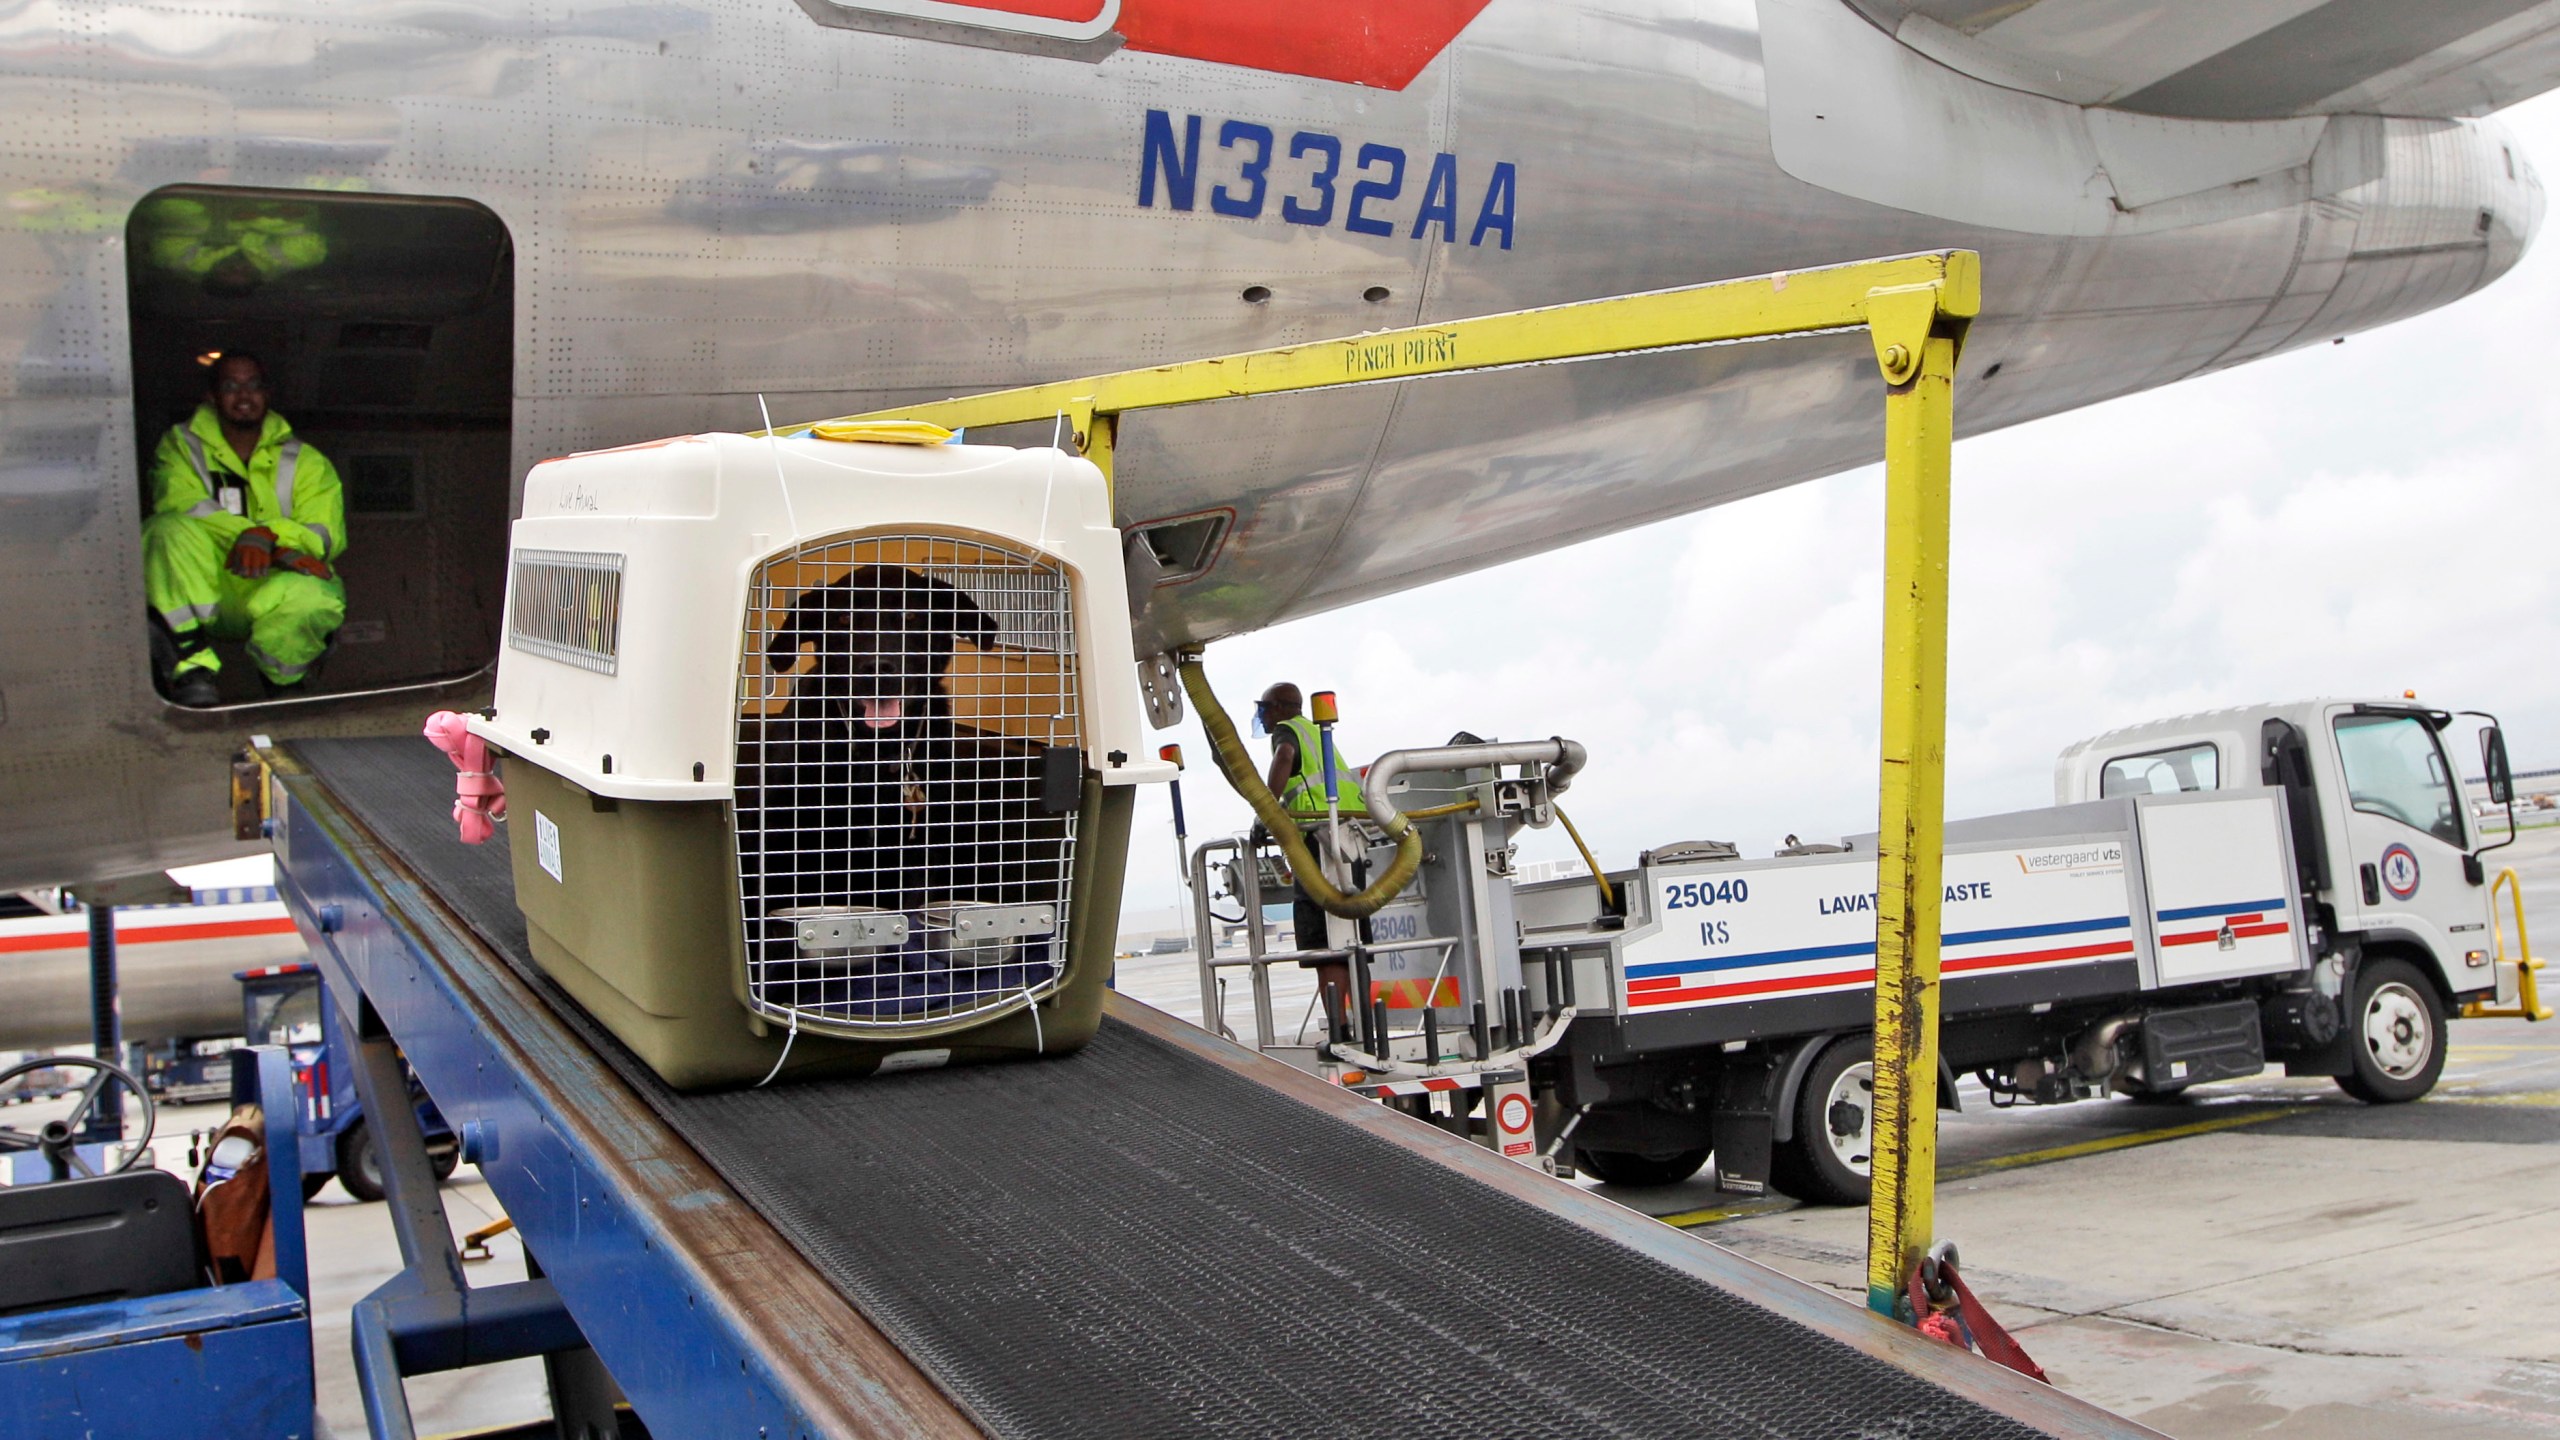 FILE - An American Airlines grounds crew unloads a dog from the cargo area of an arriving flight, Aug. 1, 2012, at John F. Kennedy International Airport in New York. American Airlines is relaxing part of its pet policy to let owners bring their companion and a full-size carry-on bag into the cabin. (AP Photo/Mary Altaffer, File)